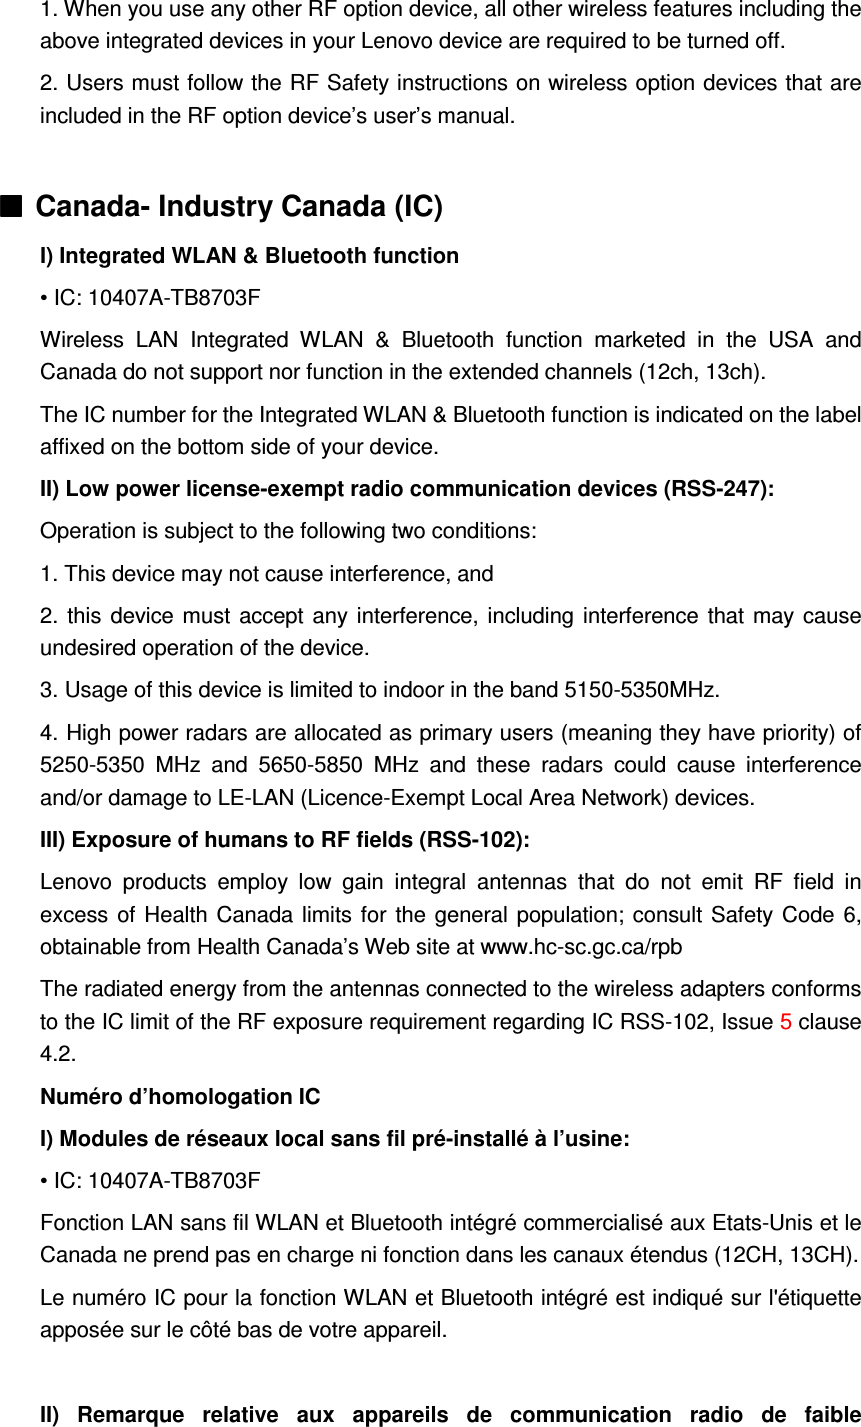 1. When you use any other RF option device, all other wireless features including the above integrated devices in your Lenovo device are required to be turned off. 2. Users must follow the RF Safety instructions on wireless option devices that are included in the RF option device’s user’s manual.  ■■■■ Canada- Industry Canada (IC) I) Integrated WLAN &amp; Bluetooth function • IC: 10407A-TB8703F Wireless  LAN  Integrated  WLAN  &amp;  Bluetooth  function  marketed  in  the  USA  and Canada do not support nor function in the extended channels (12ch, 13ch). The IC number for the Integrated WLAN &amp; Bluetooth function is indicated on the label affixed on the bottom side of your device. II) Low power license-exempt radio communication devices (RSS-247): Operation is subject to the following two conditions: 1. This device may not cause interference, and 2. this  device must accept any interference, including interference that may cause undesired operation of the device. 3. Usage of this device is limited to indoor in the band 5150-5350MHz. 4. High power radars are allocated as primary users (meaning they have priority) of 5250-5350  MHz  and  5650-5850  MHz  and  these  radars  could  cause  interference and/or damage to LE-LAN (Licence-Exempt Local Area Network) devices. III) Exposure of humans to RF fields (RSS-102): Lenovo  products  employ  low  gain  integral  antennas  that  do  not  emit  RF  field  in excess of Health Canada limits for the general population; consult Safety Code 6, obtainable from Health Canada’s Web site at www.hc-sc.gc.ca/rpb   The radiated energy from the antennas connected to the wireless adapters conforms to the IC limit of the RF exposure requirement regarding IC RSS-102, Issue 5 clause 4.2. Numéro d’homologation IC I) Modules de réseaux local sans fil pré-installé à l’usine: • IC: 10407A-TB8703F Fonction LAN sans fil WLAN et Bluetooth intégré commercialisé aux Etats-Unis et le Canada ne prend pas en charge ni fonction dans les canaux étendus (12CH, 13CH). Le numéro IC pour la fonction WLAN et Bluetooth intégré est indiqué sur l&apos;étiquette apposée sur le côté bas de votre appareil.  II)  Remarque  relative  aux  appareils  de  communication  radio  de  faible 